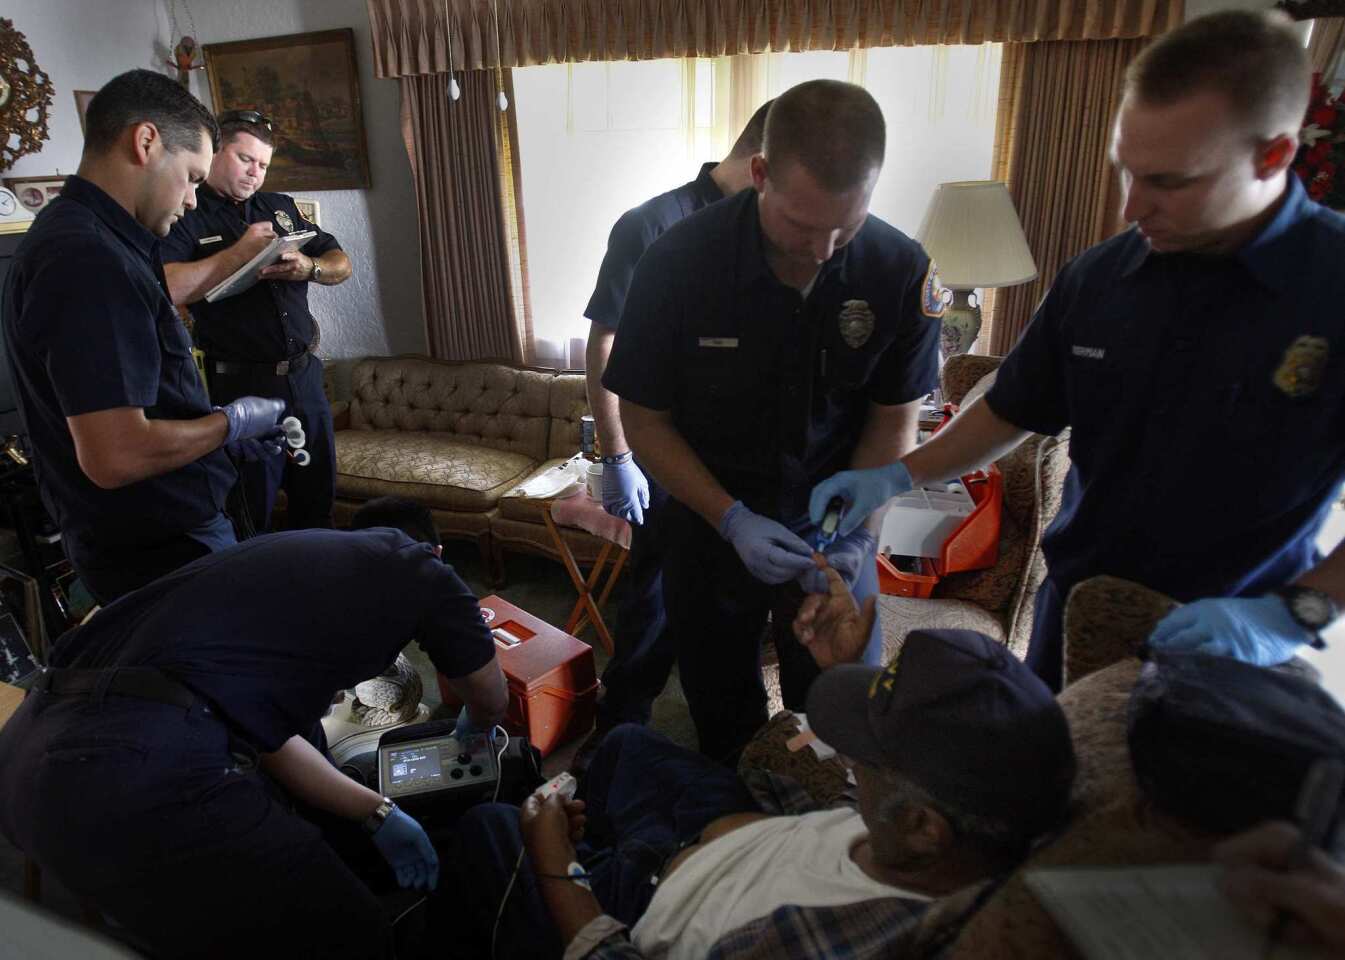 Los Angeles County firefighters and paramedics take the vital signs of Nathan Shands, 90, whose family called 911 because he had been throwing up and they couldn't get him in the car. Shands was taken to St. Francis Medical Center in Inglewood by private ambulance.